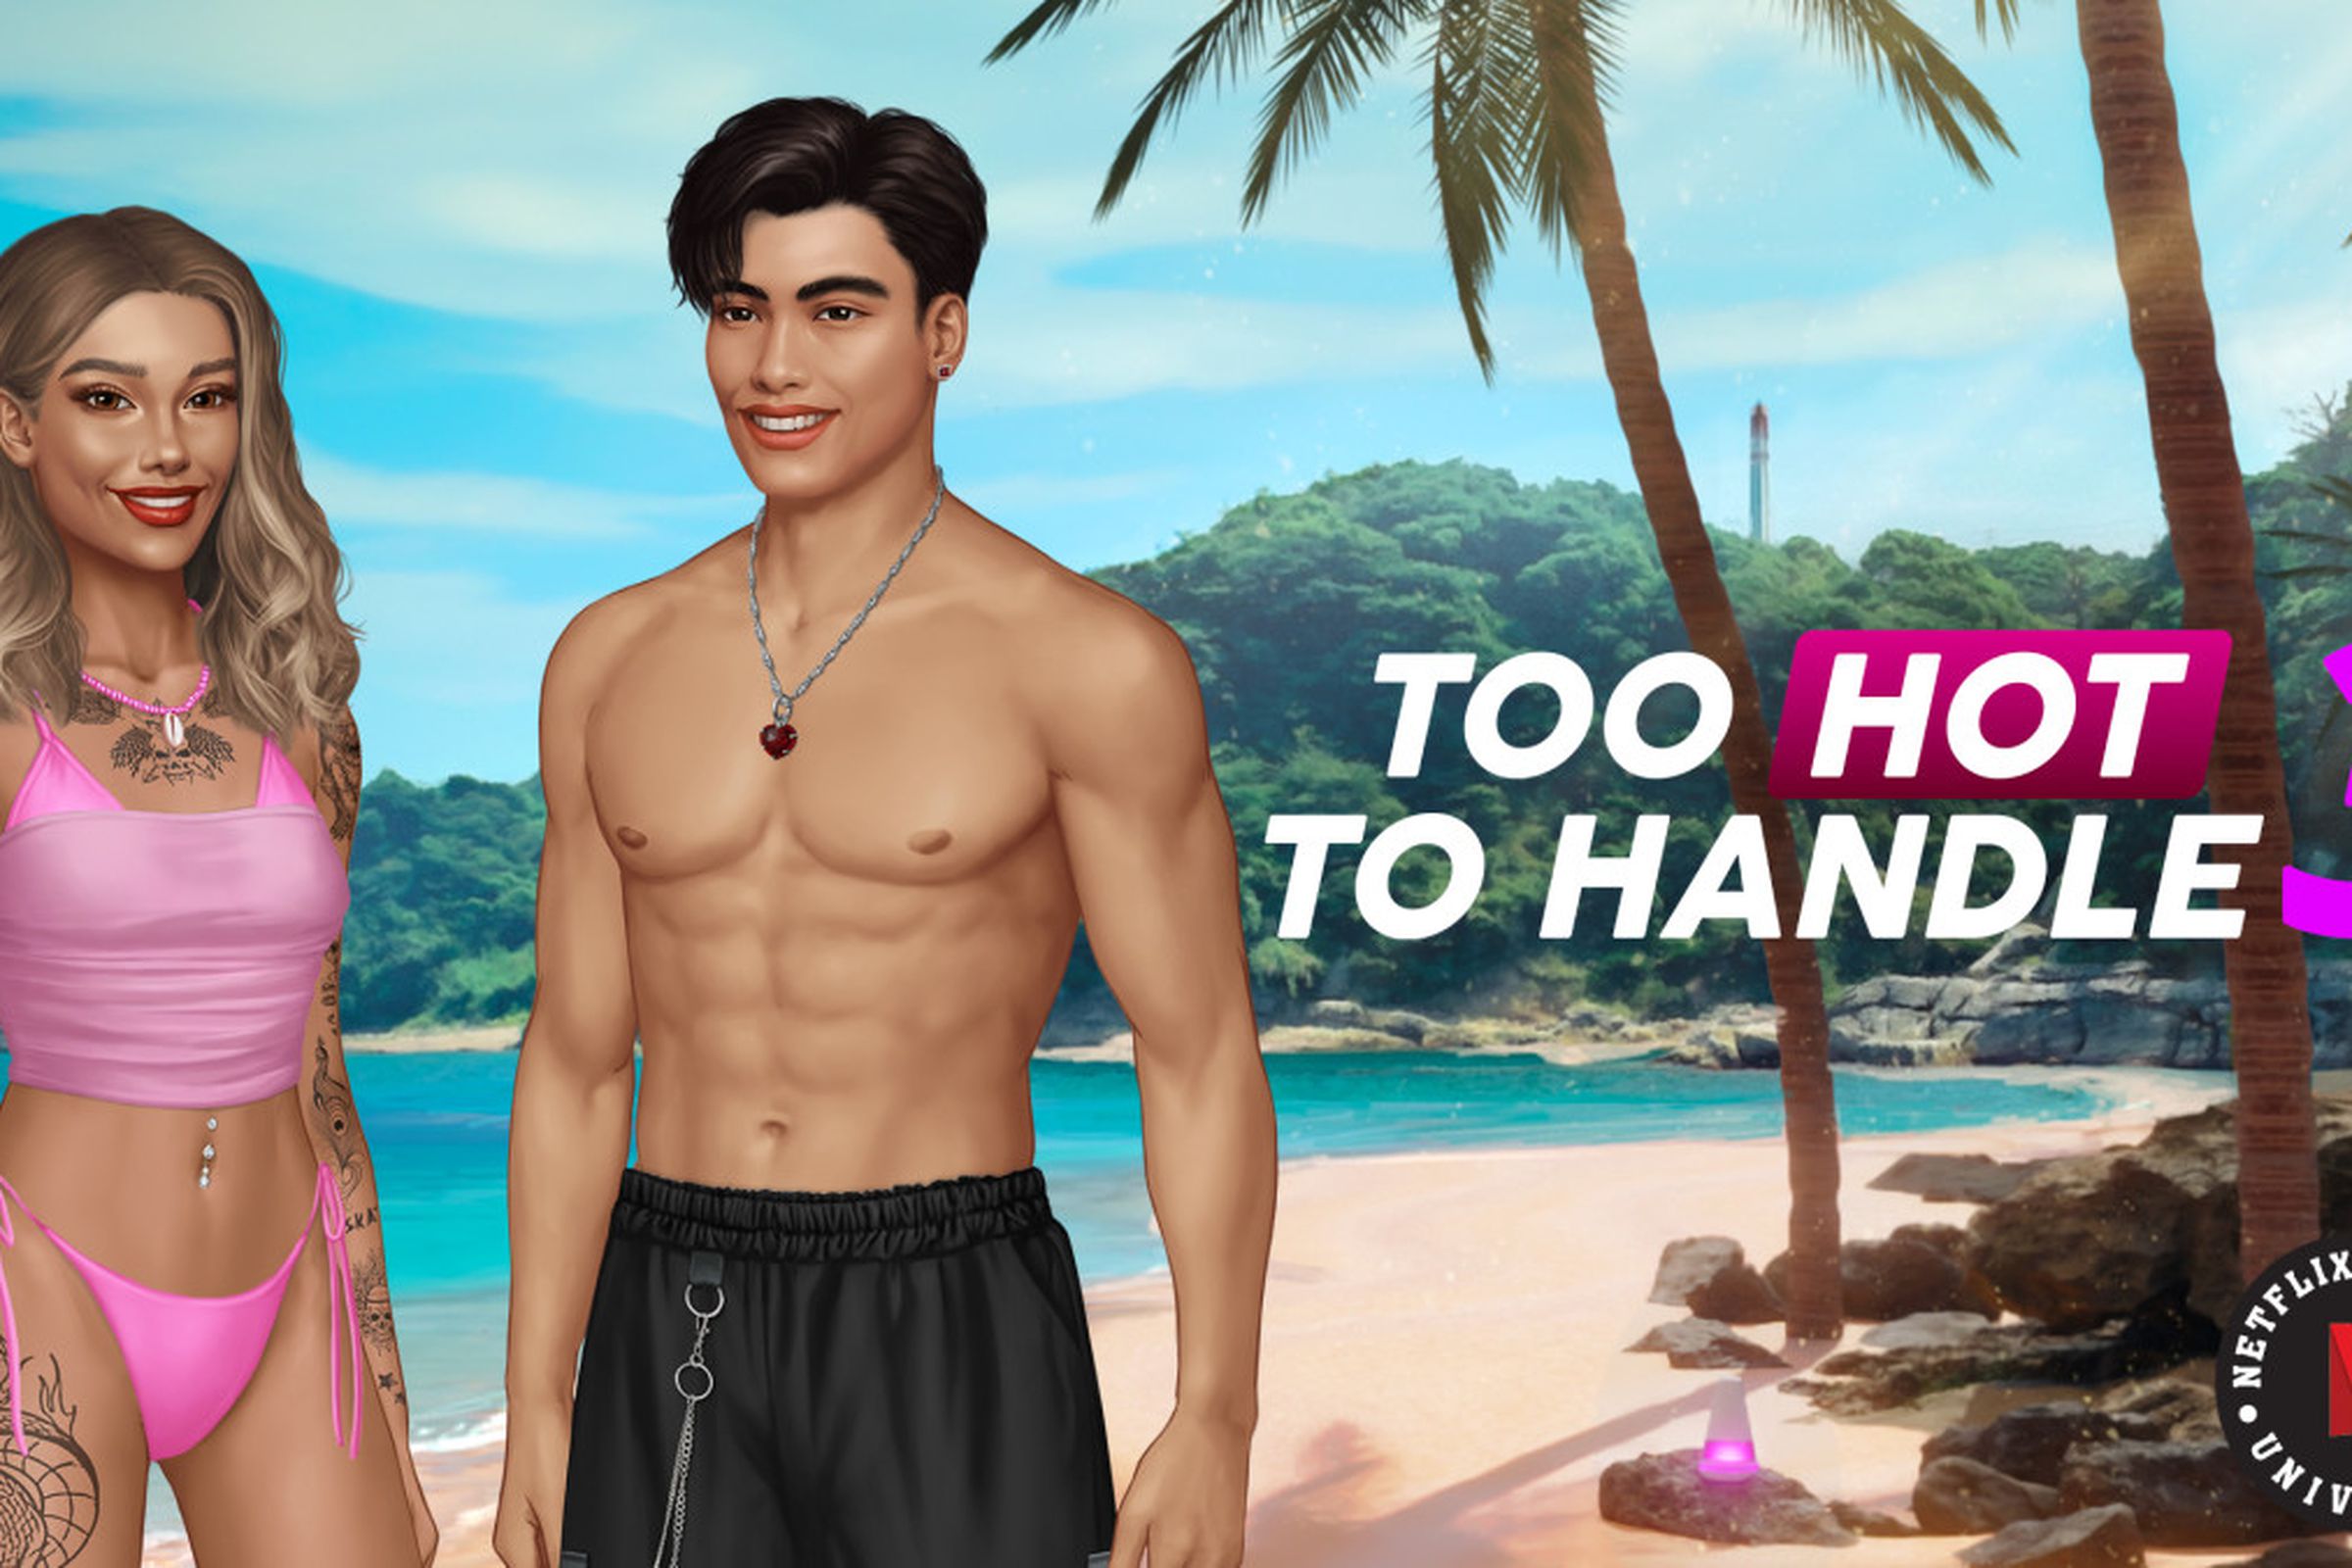 Graphic for Netflix’s Too Hot To Handle 3 interactive fiction game.